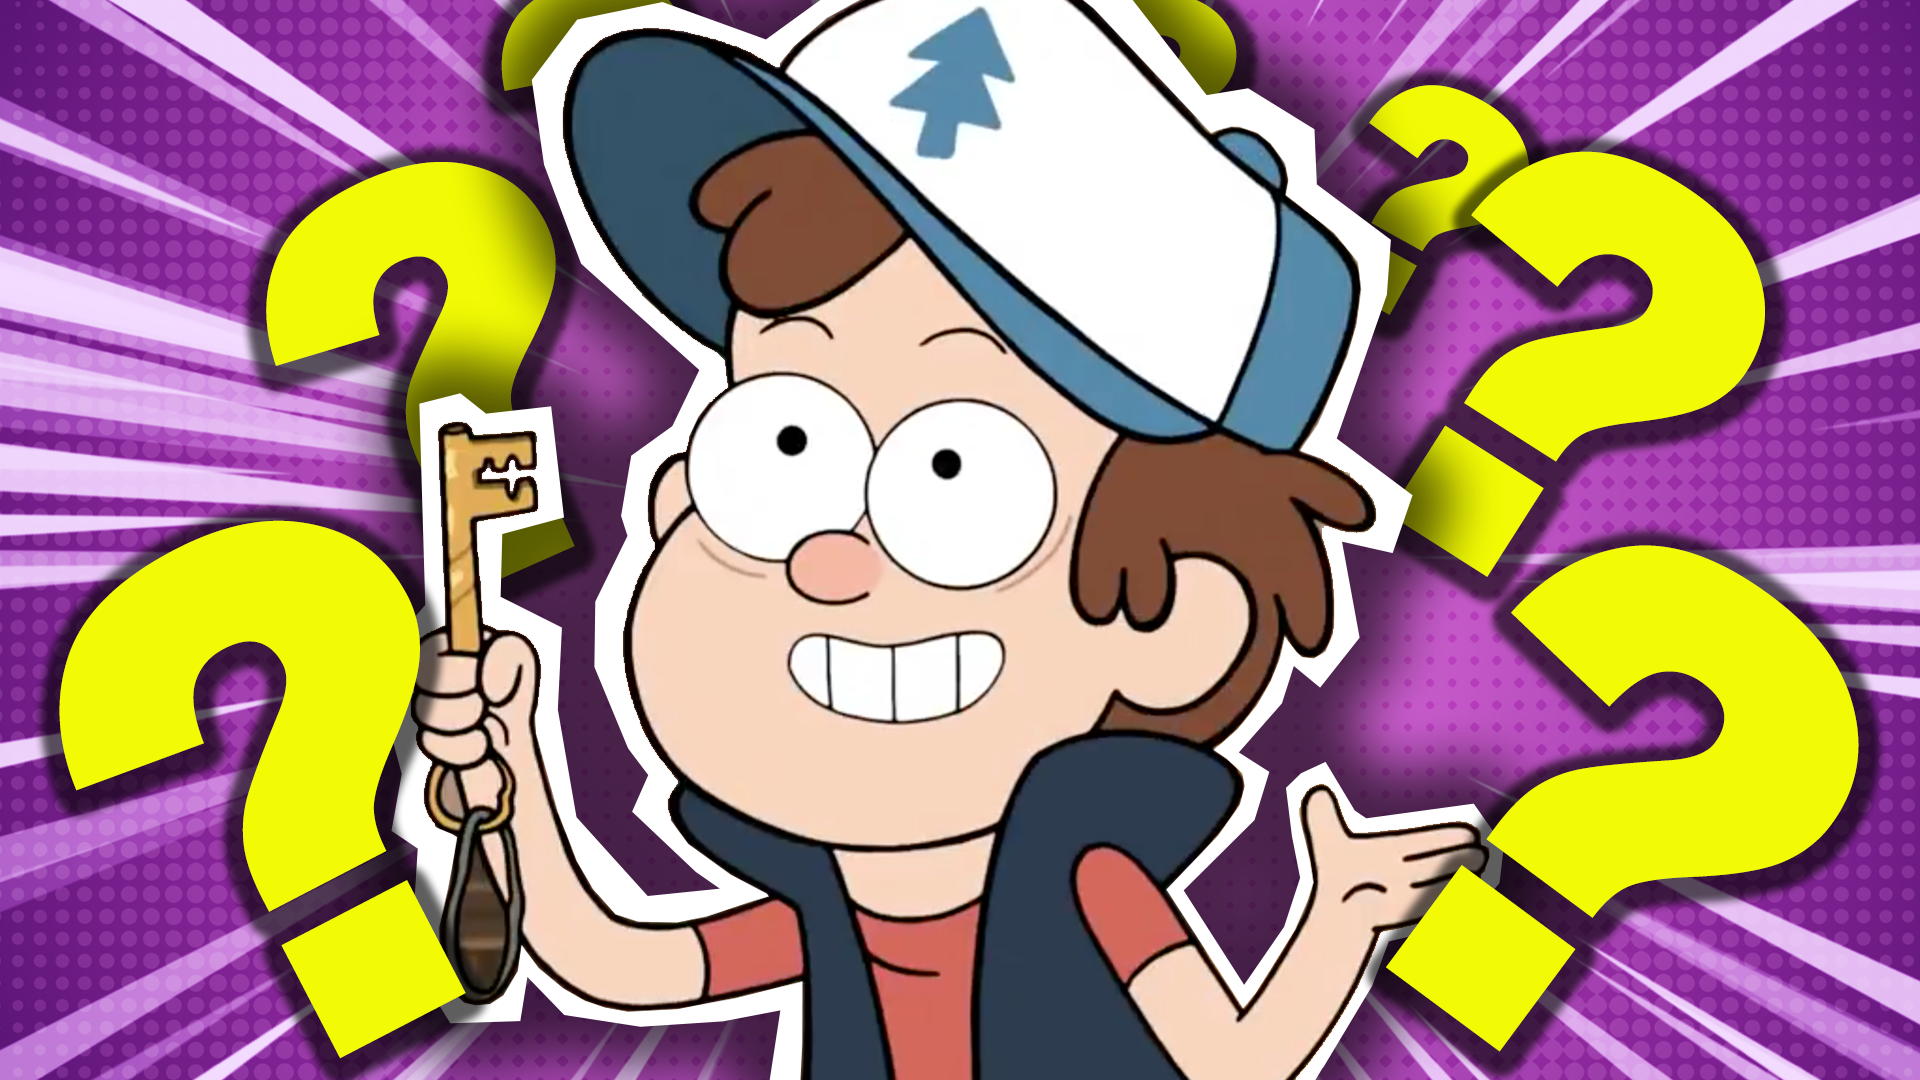 18 Fun Facts About 'Gravity Falls